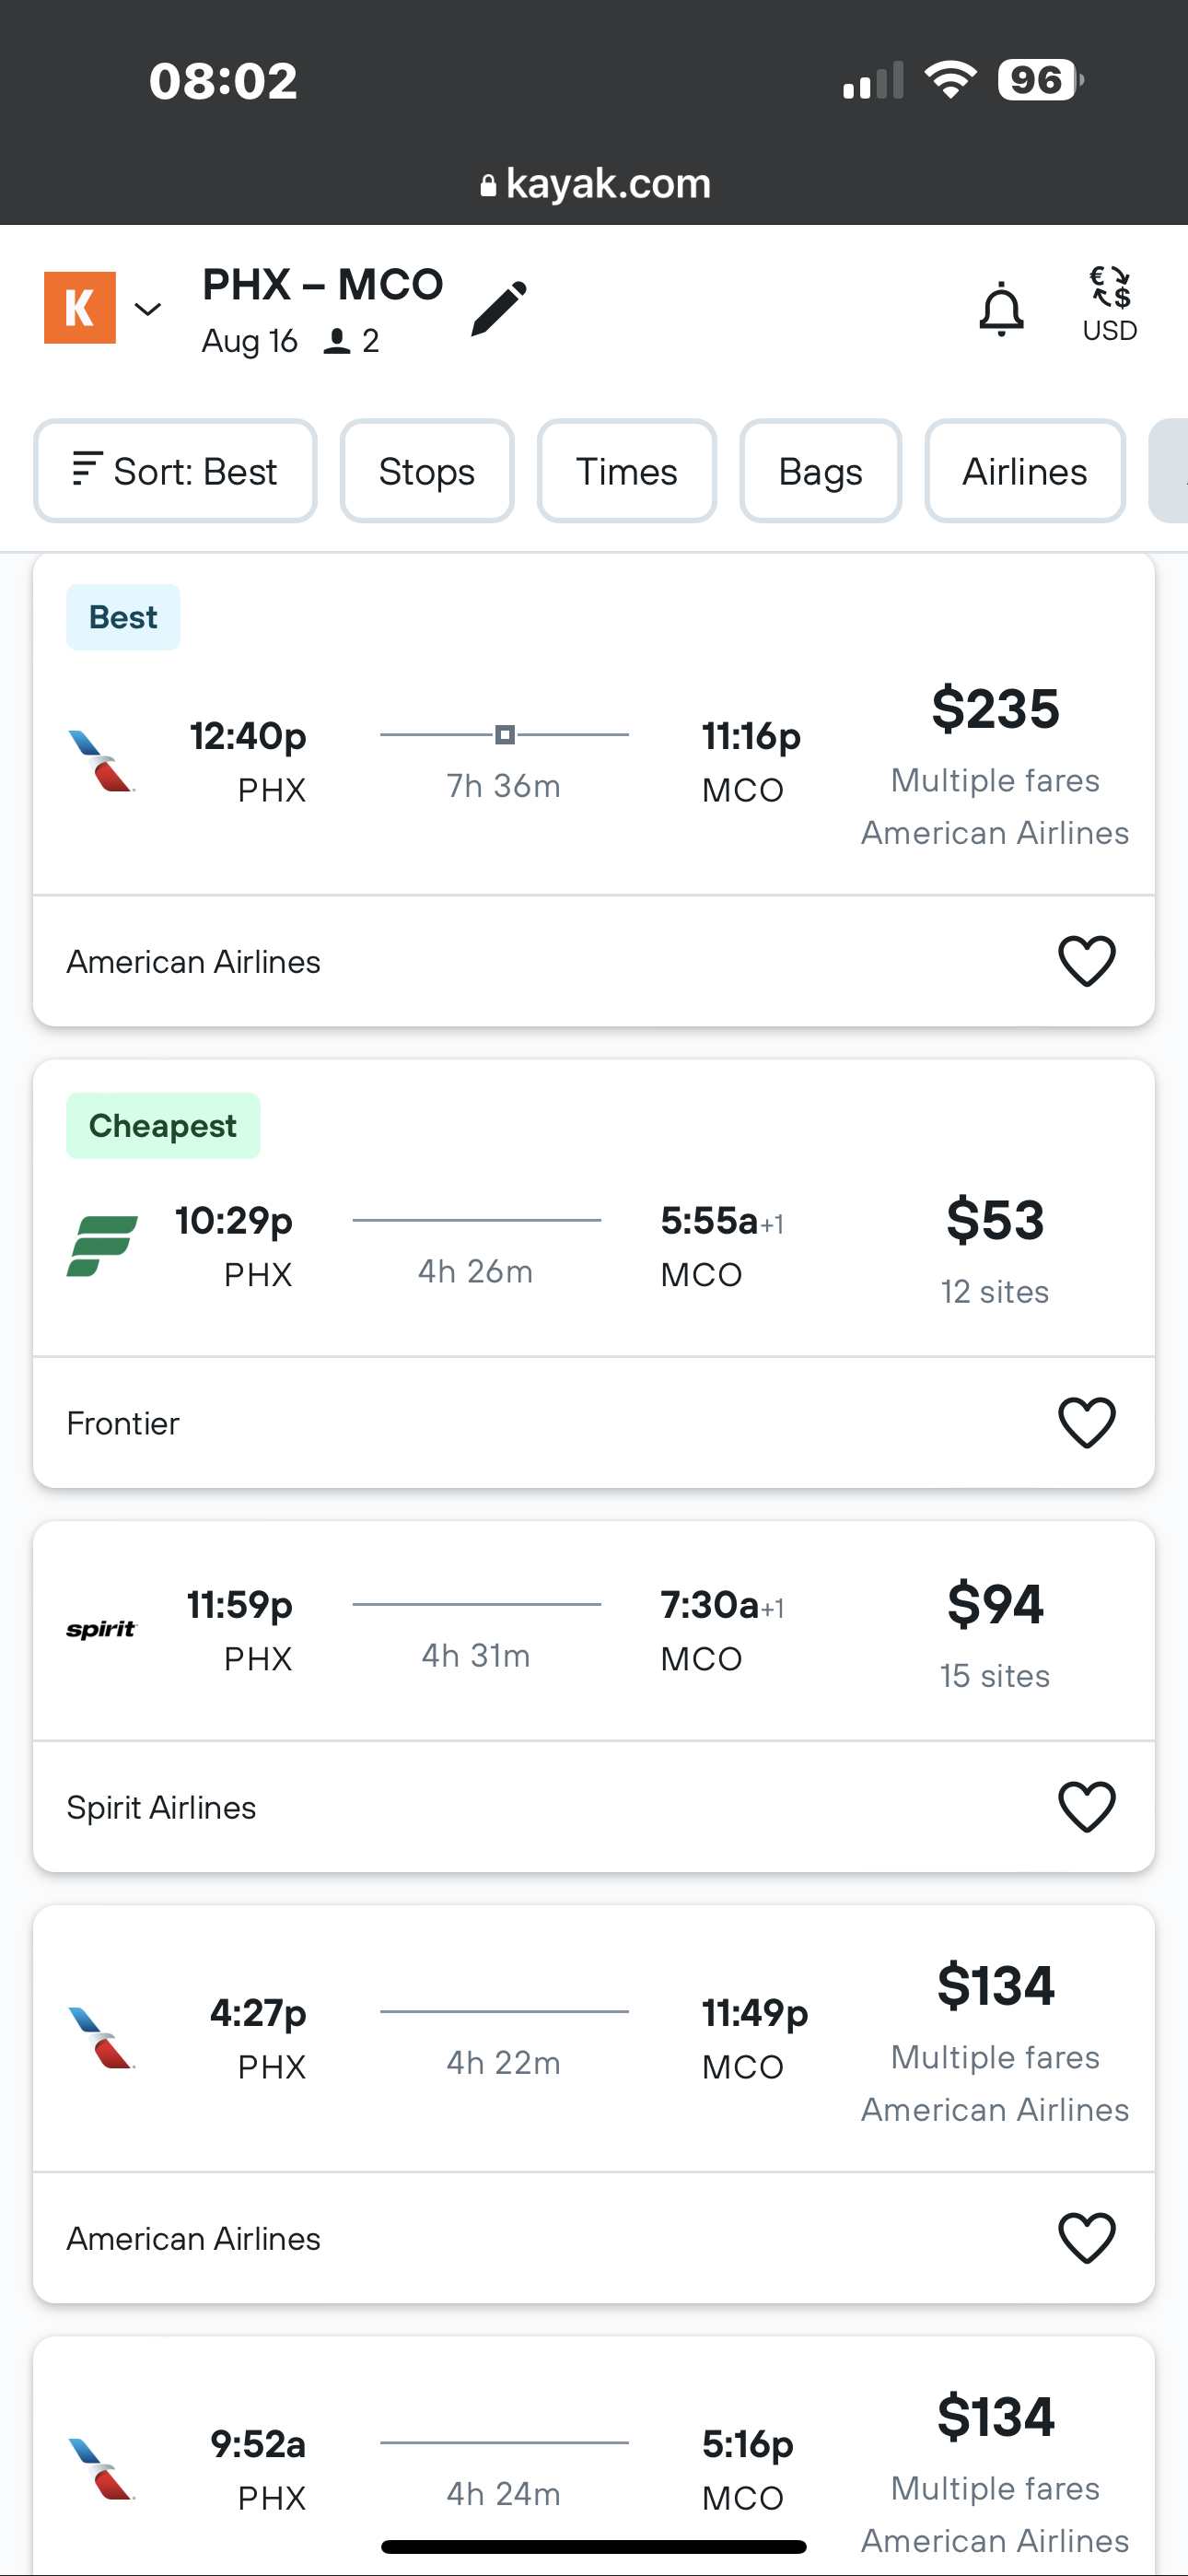 American Airlines AA - Flights, Reviews & Cancellation Policy - KAYAK